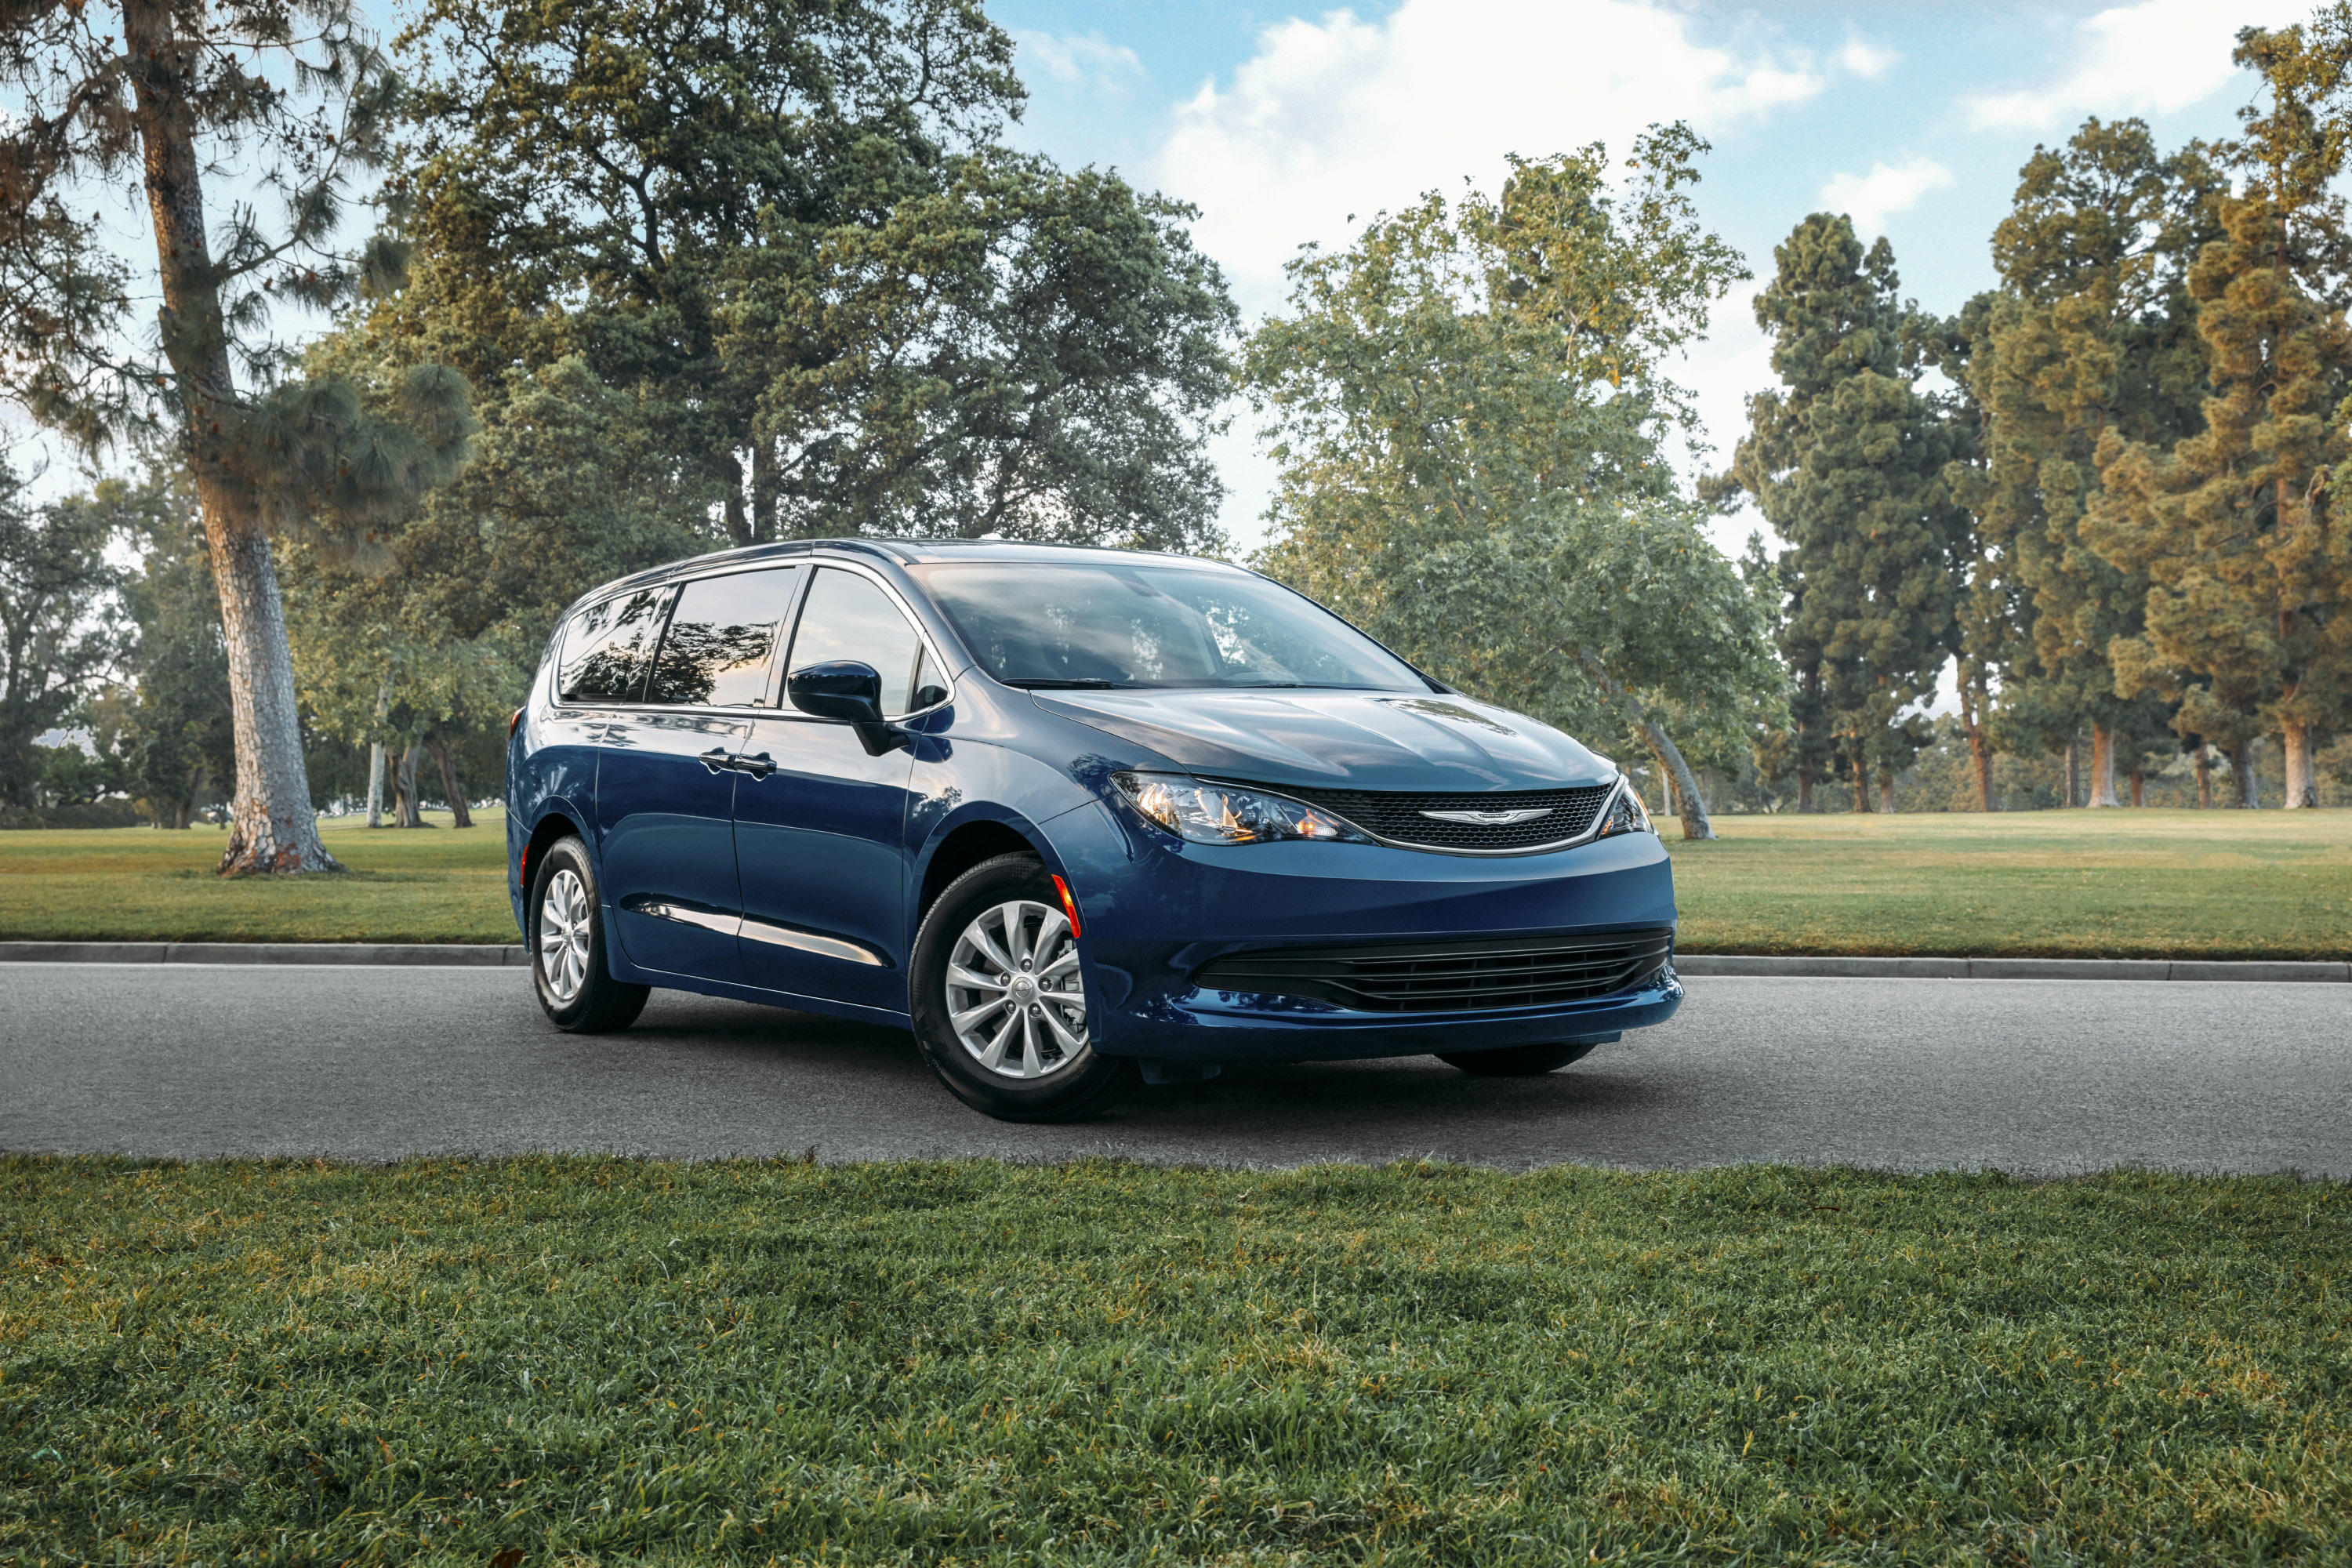 2019 minivans with stow and go seats